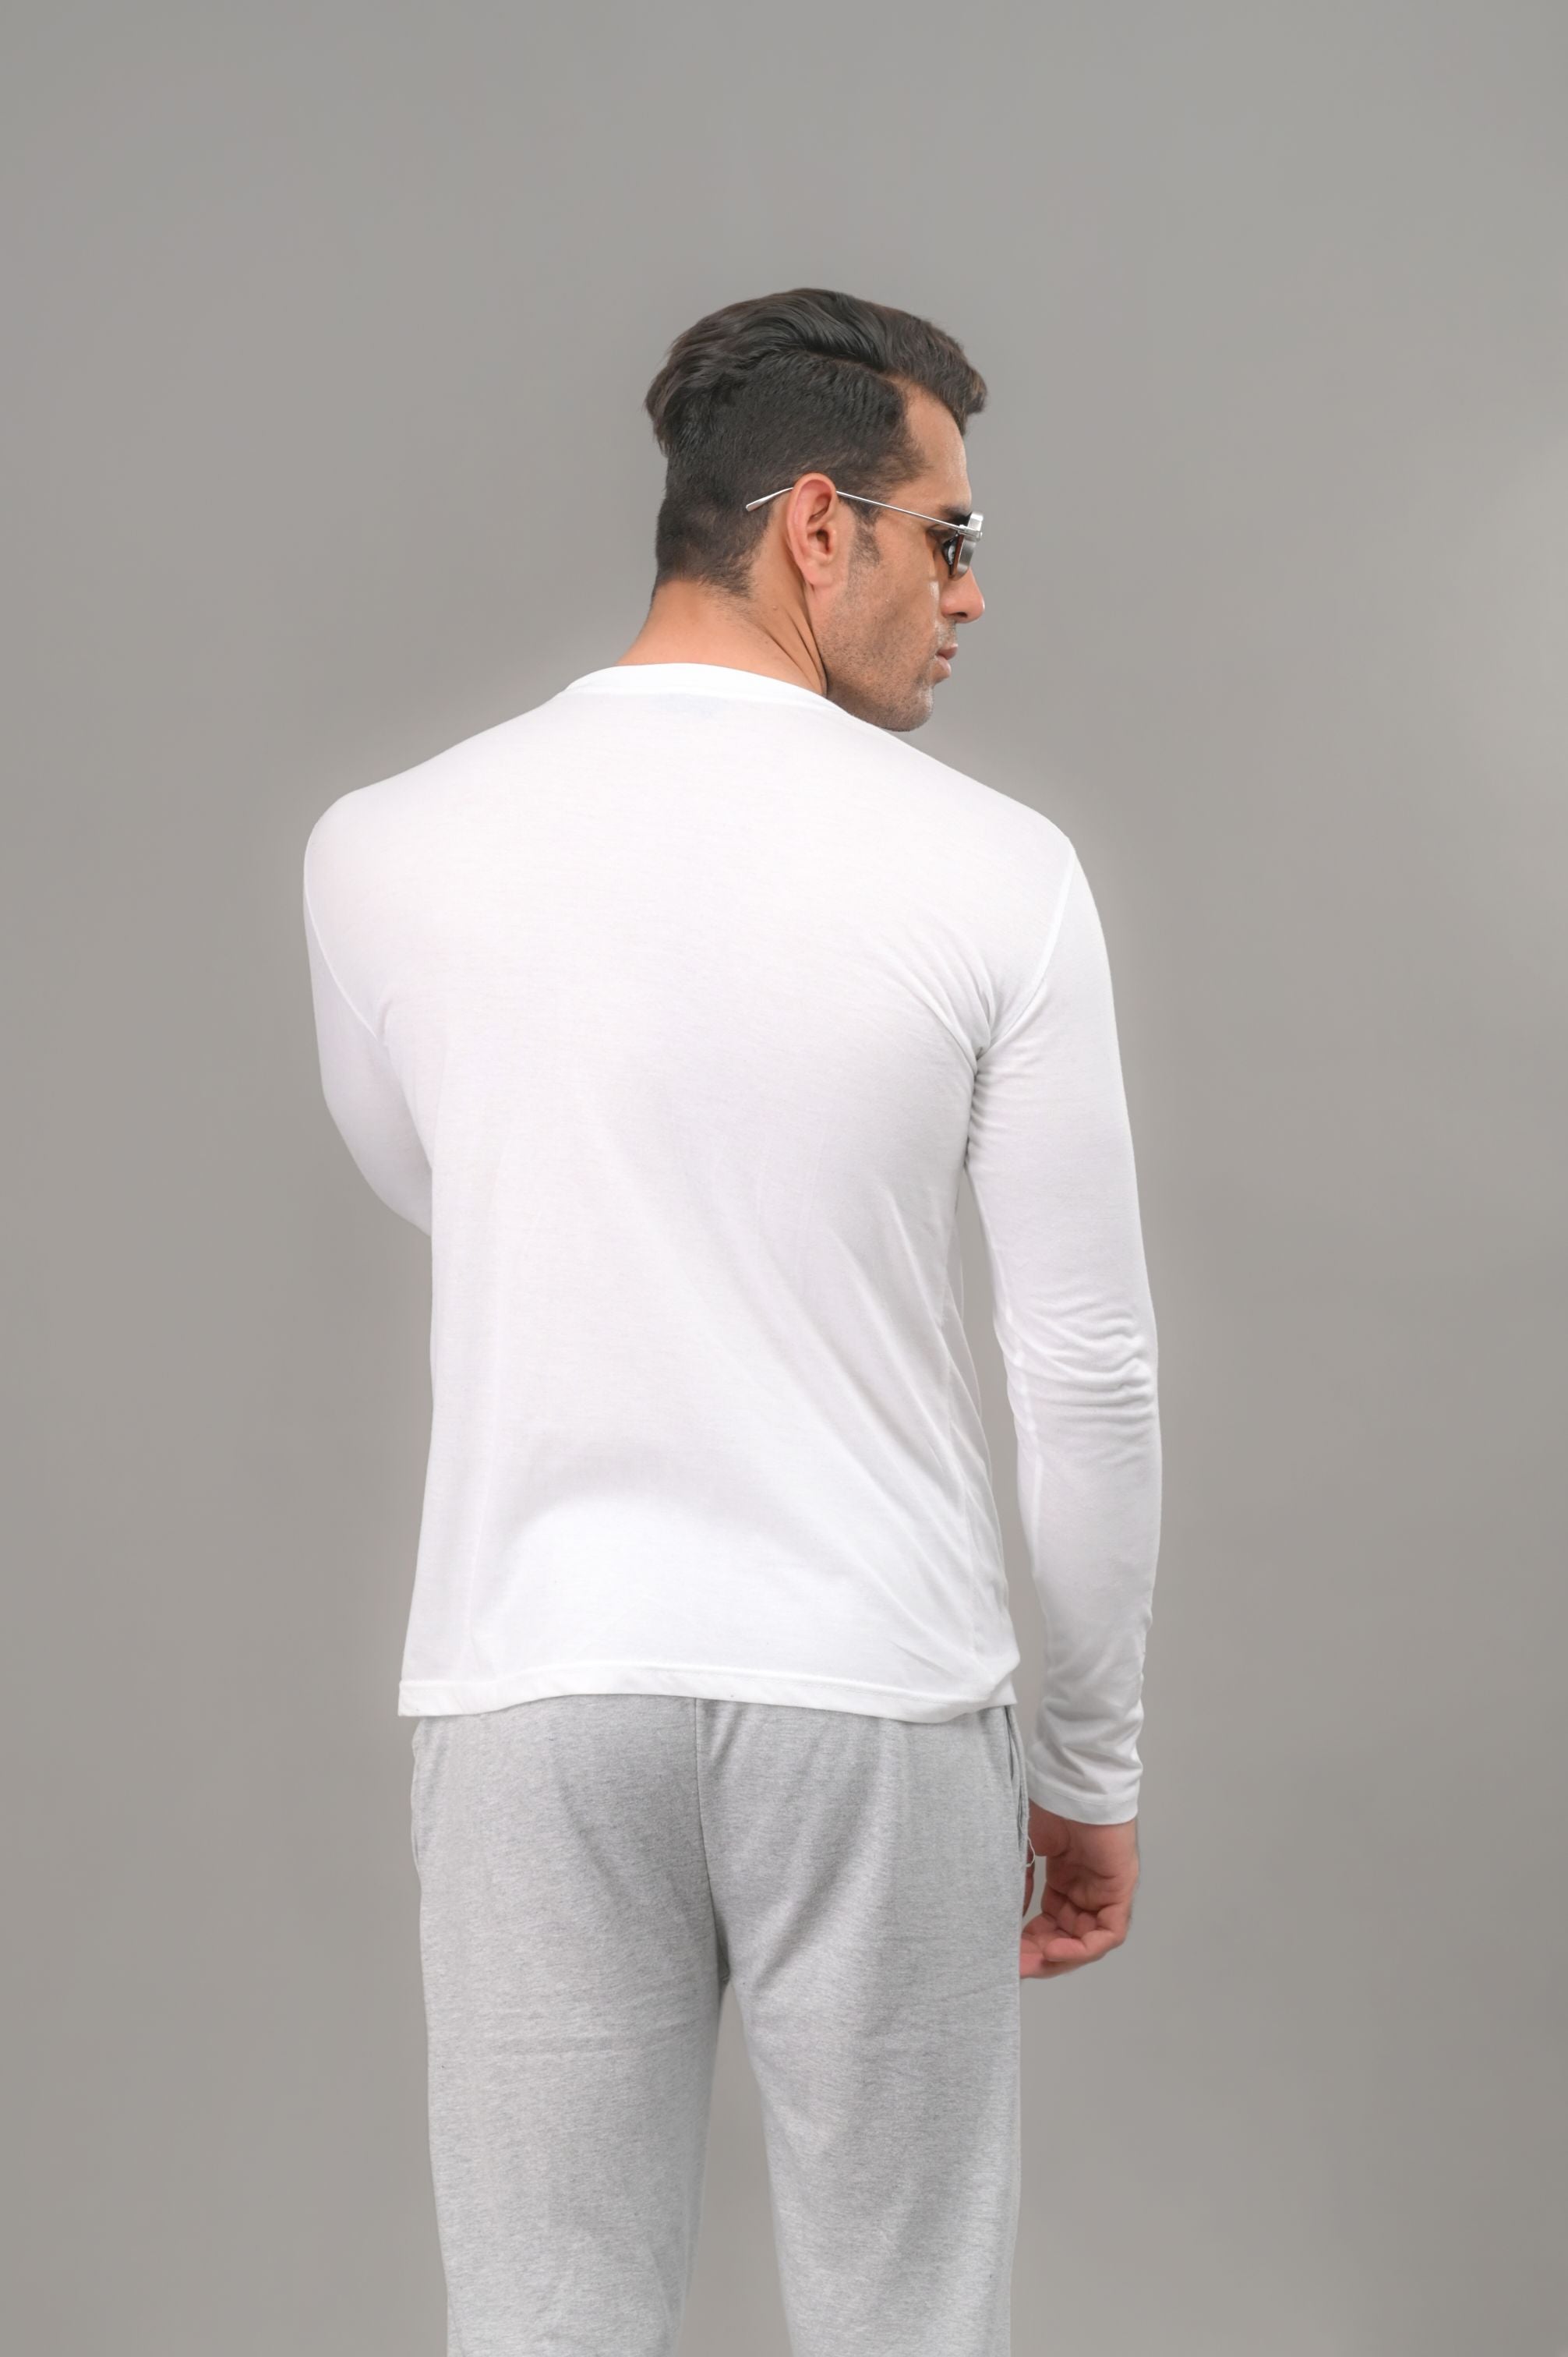 White Full Sleeves T-Shirt (2XL - 3XL - 4XL) - M - Shop Now - Checkmate Atelier